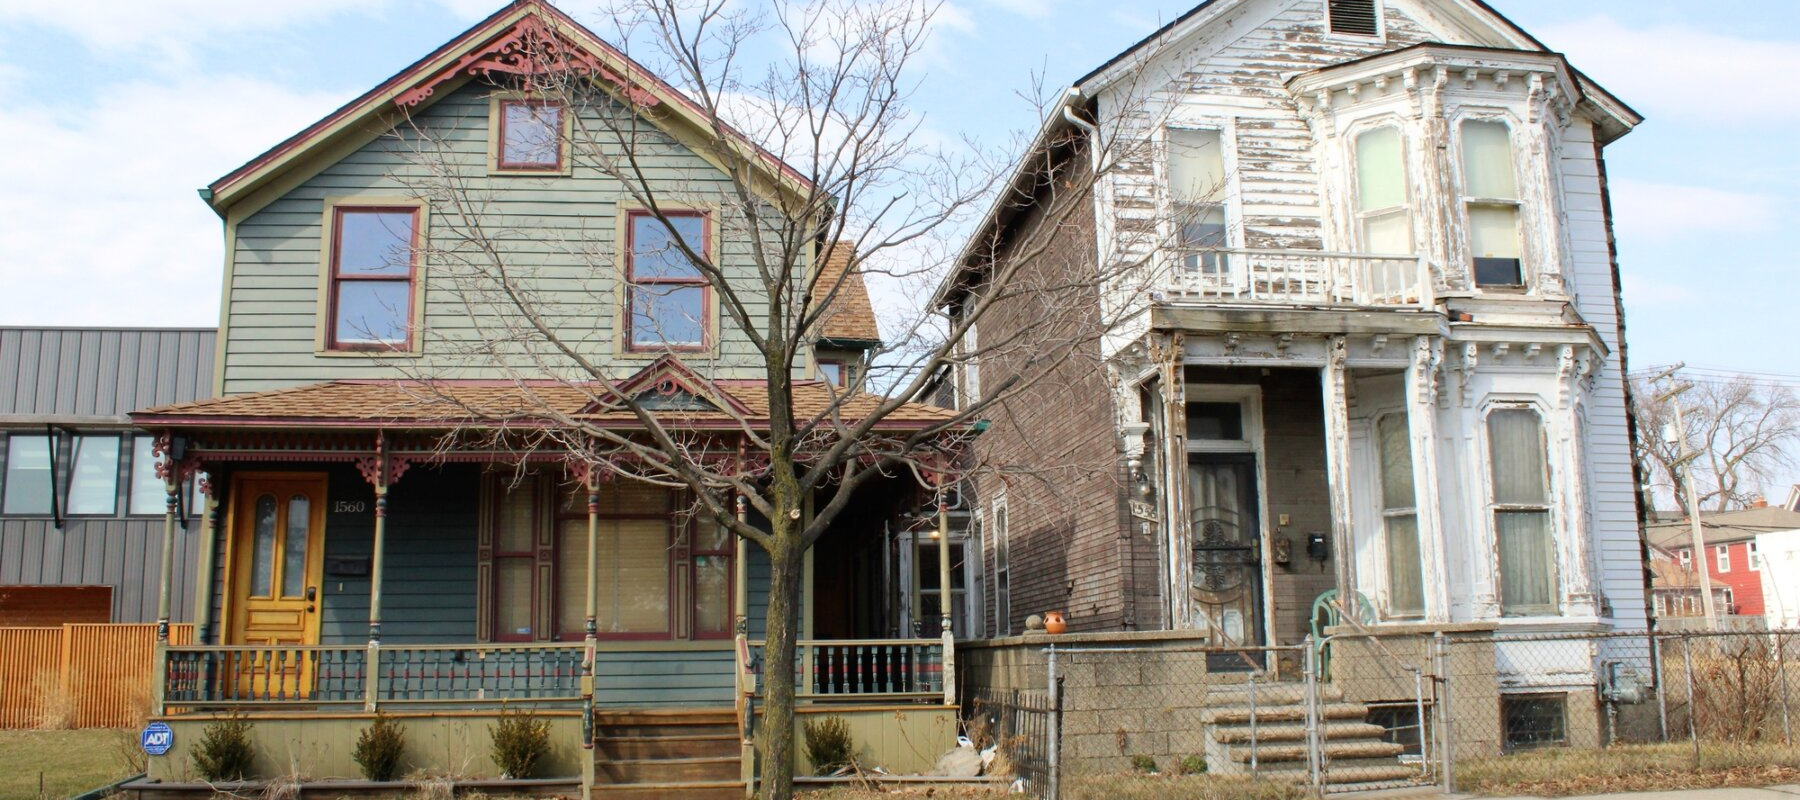 Sell Your House Fast For Cash In Detroit